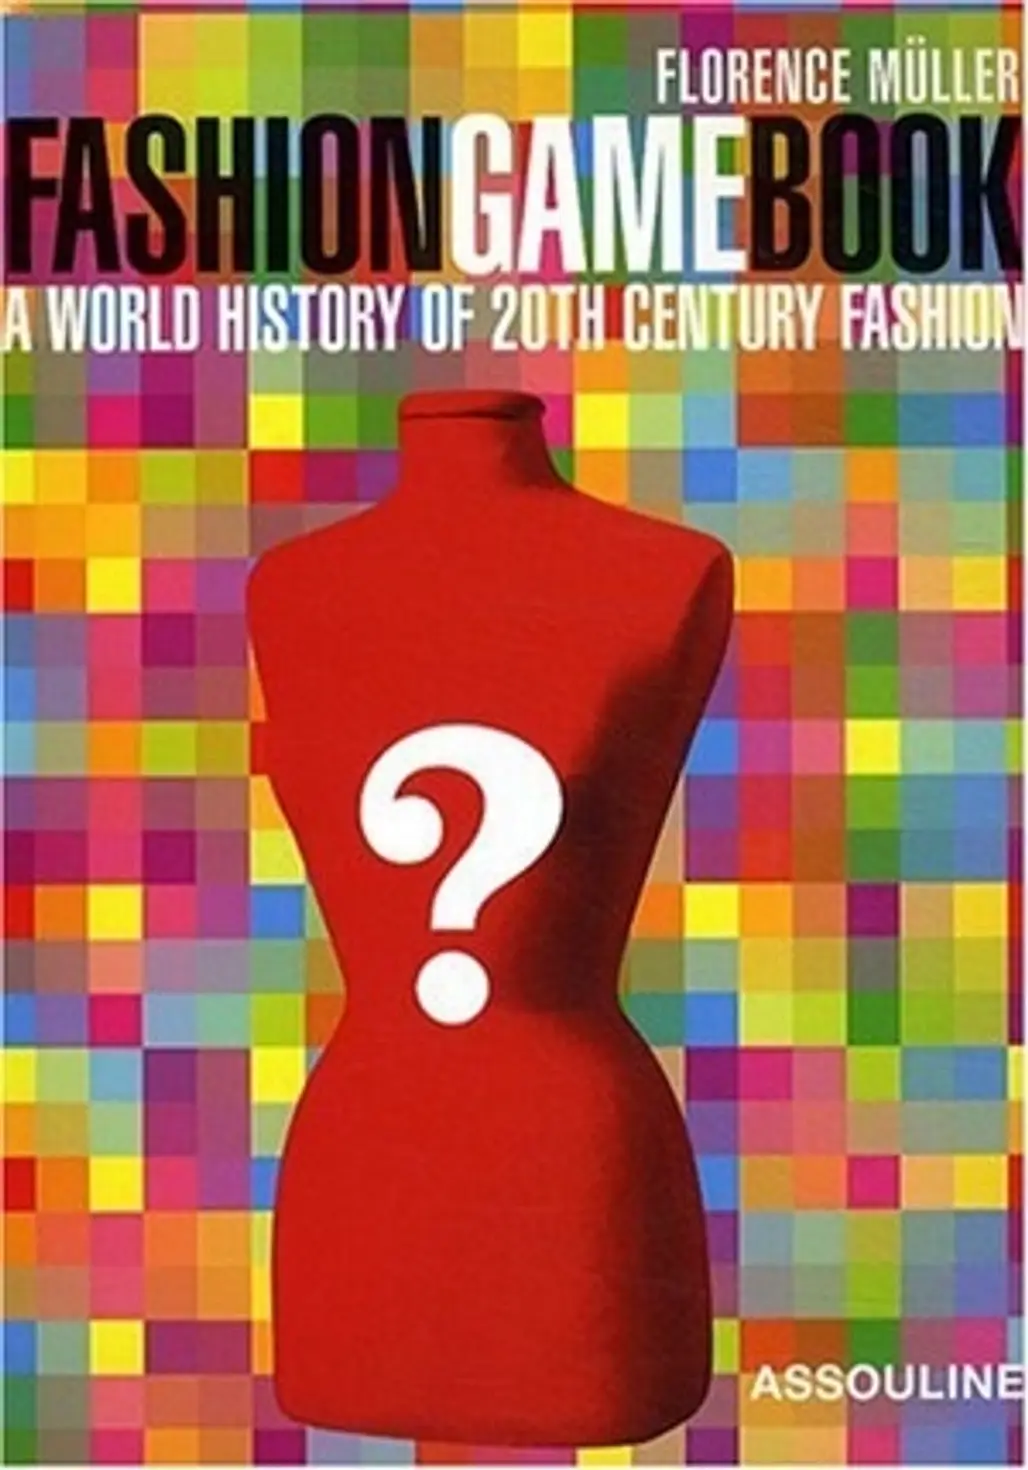 Fashion Game Book: a World History of 20th Century Fashion by Florence Muller